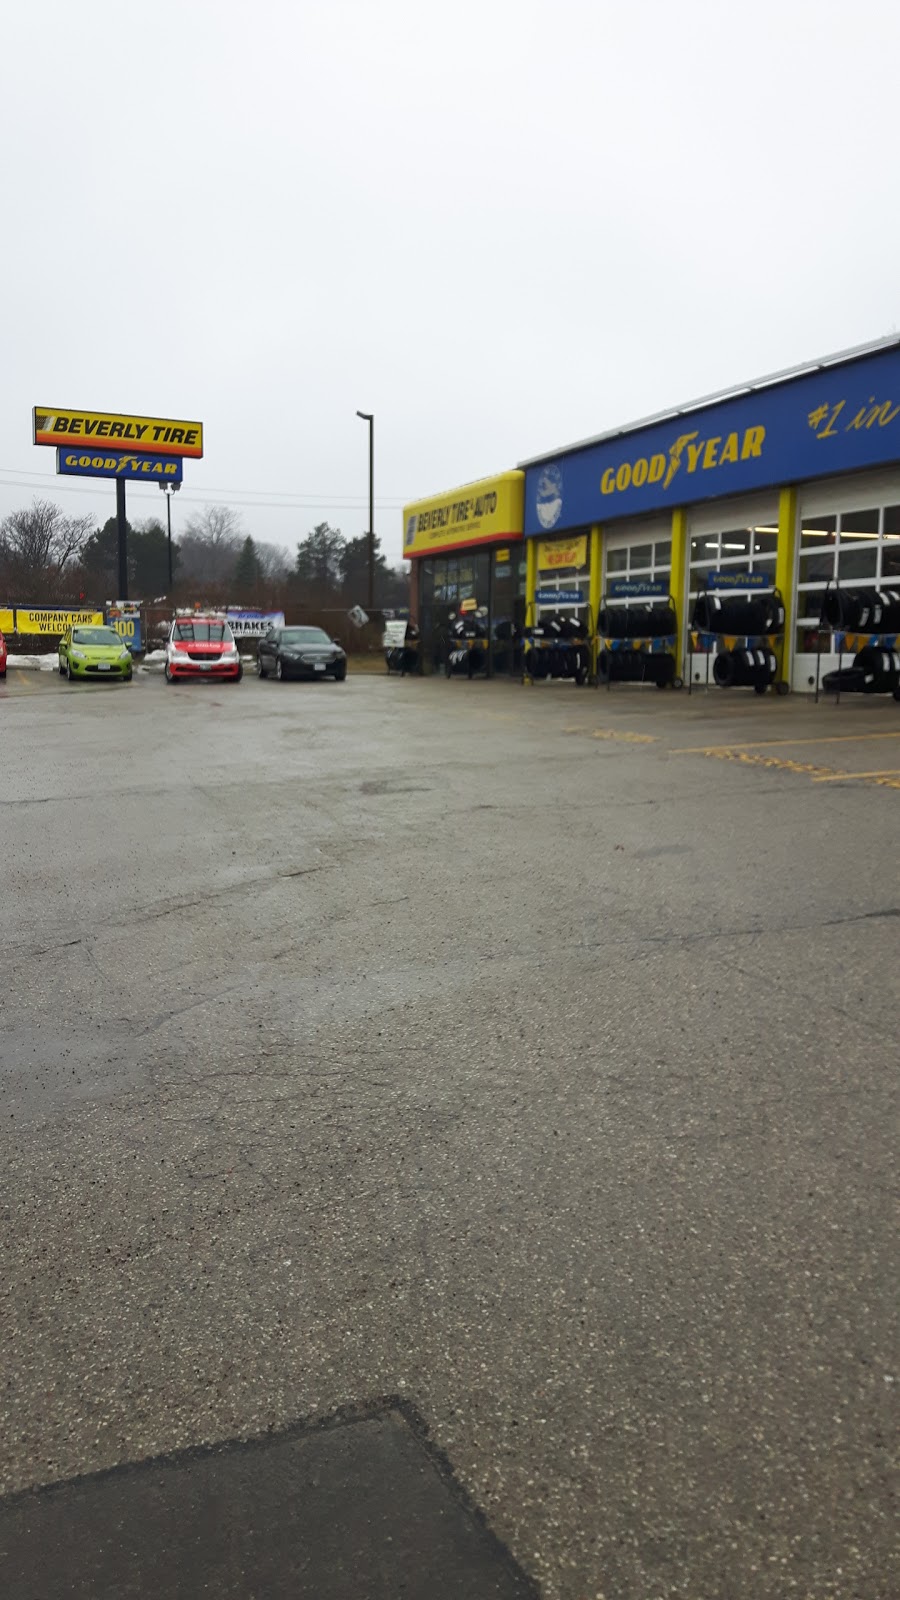 Beverly Tire & Auto | 290 Bleams Rd, Kitchener, ON N2C 2K6, Canada | Phone: (519) 748-5048